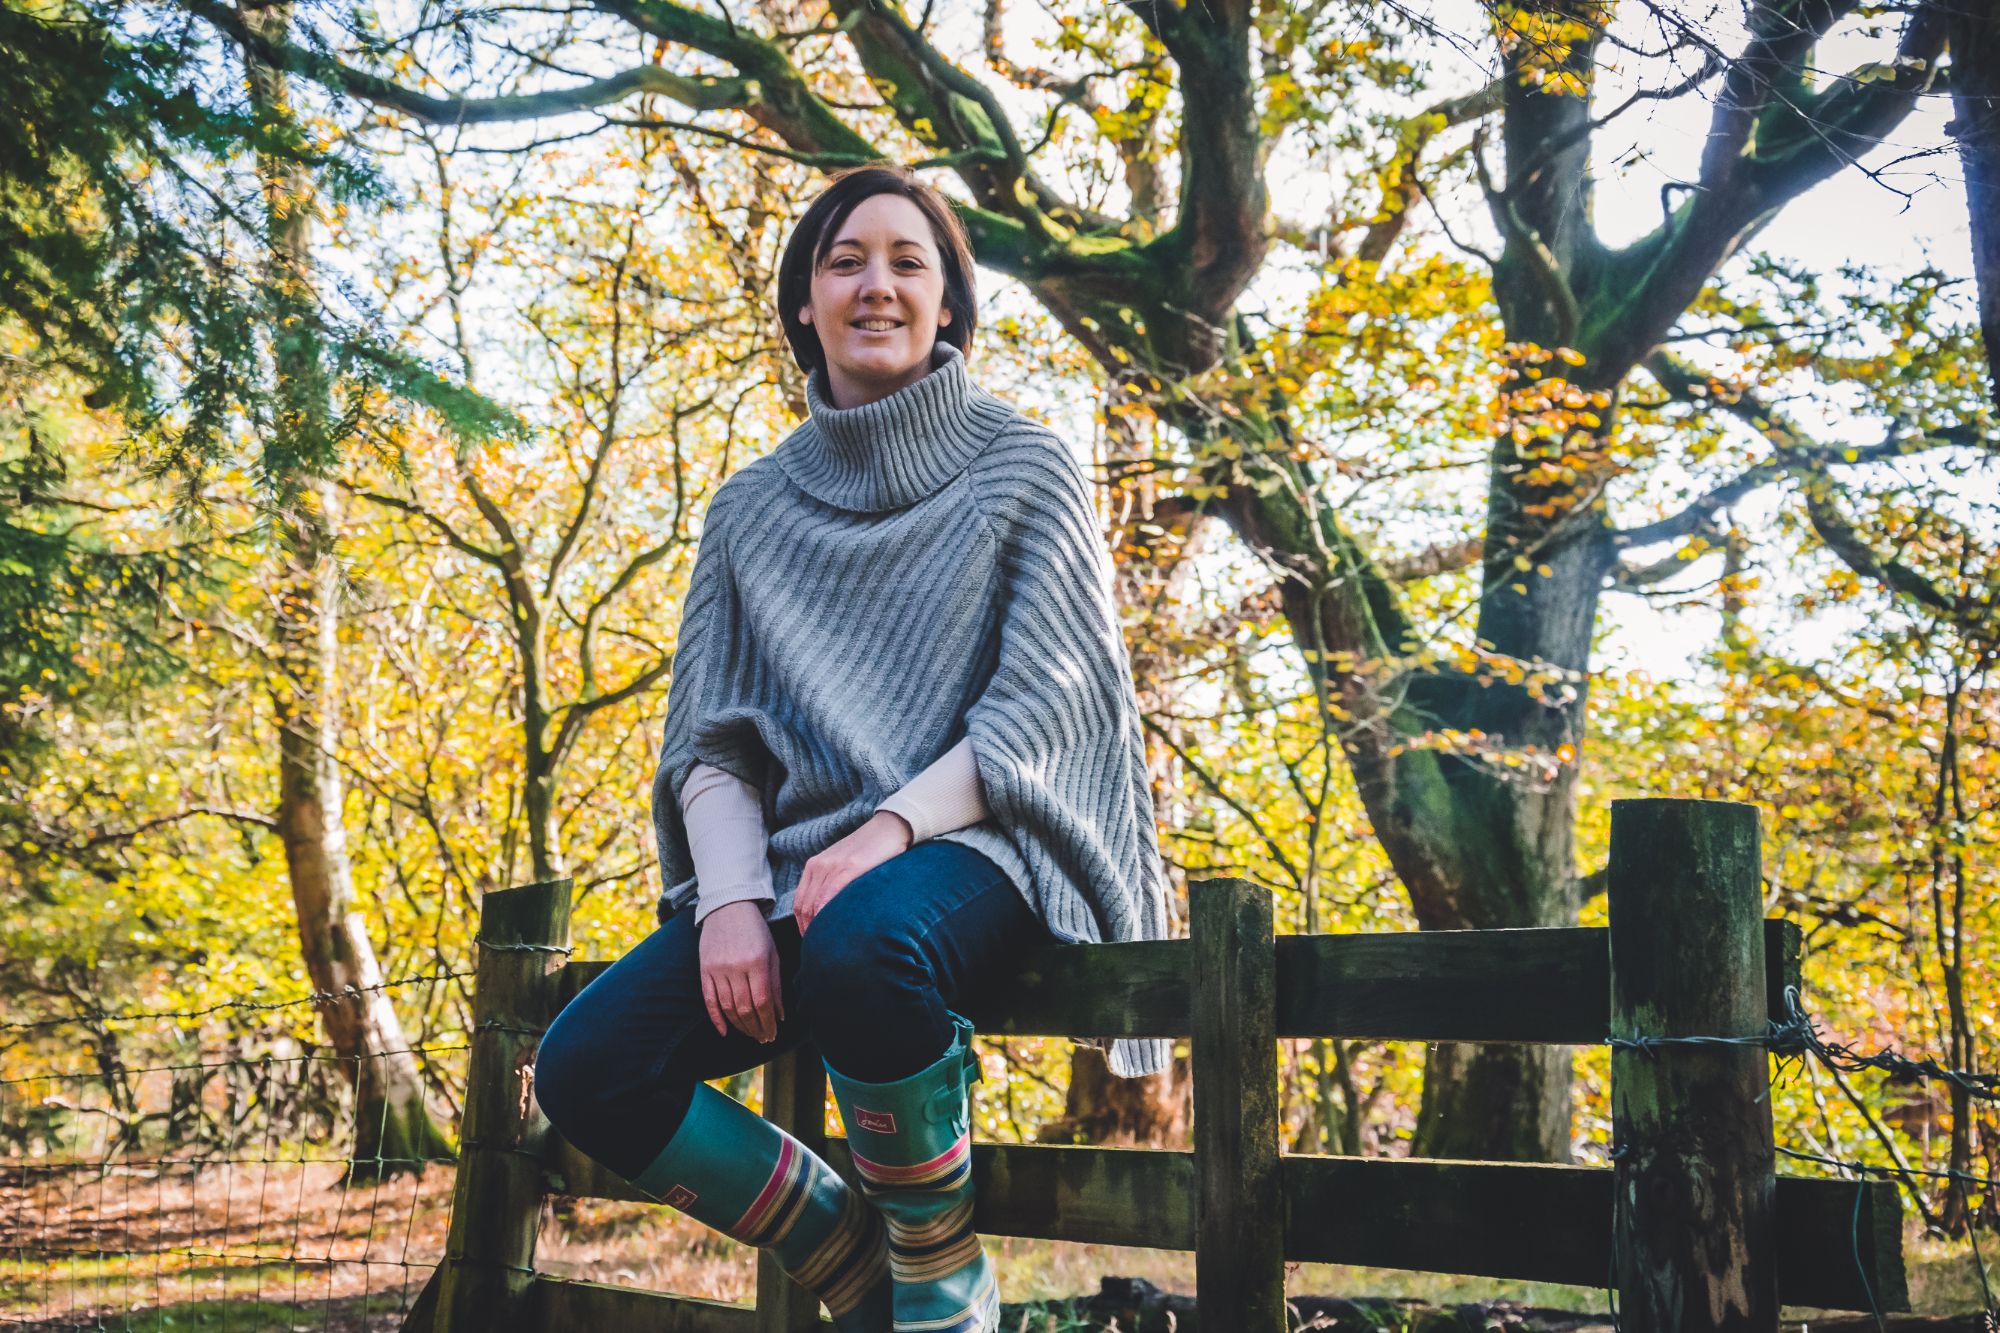 Empowering Photography for women in North Yorkshire. A woman sits on a fence and smiles while looking directly into the camera lens. She wears her normal clothes and looks beautiful